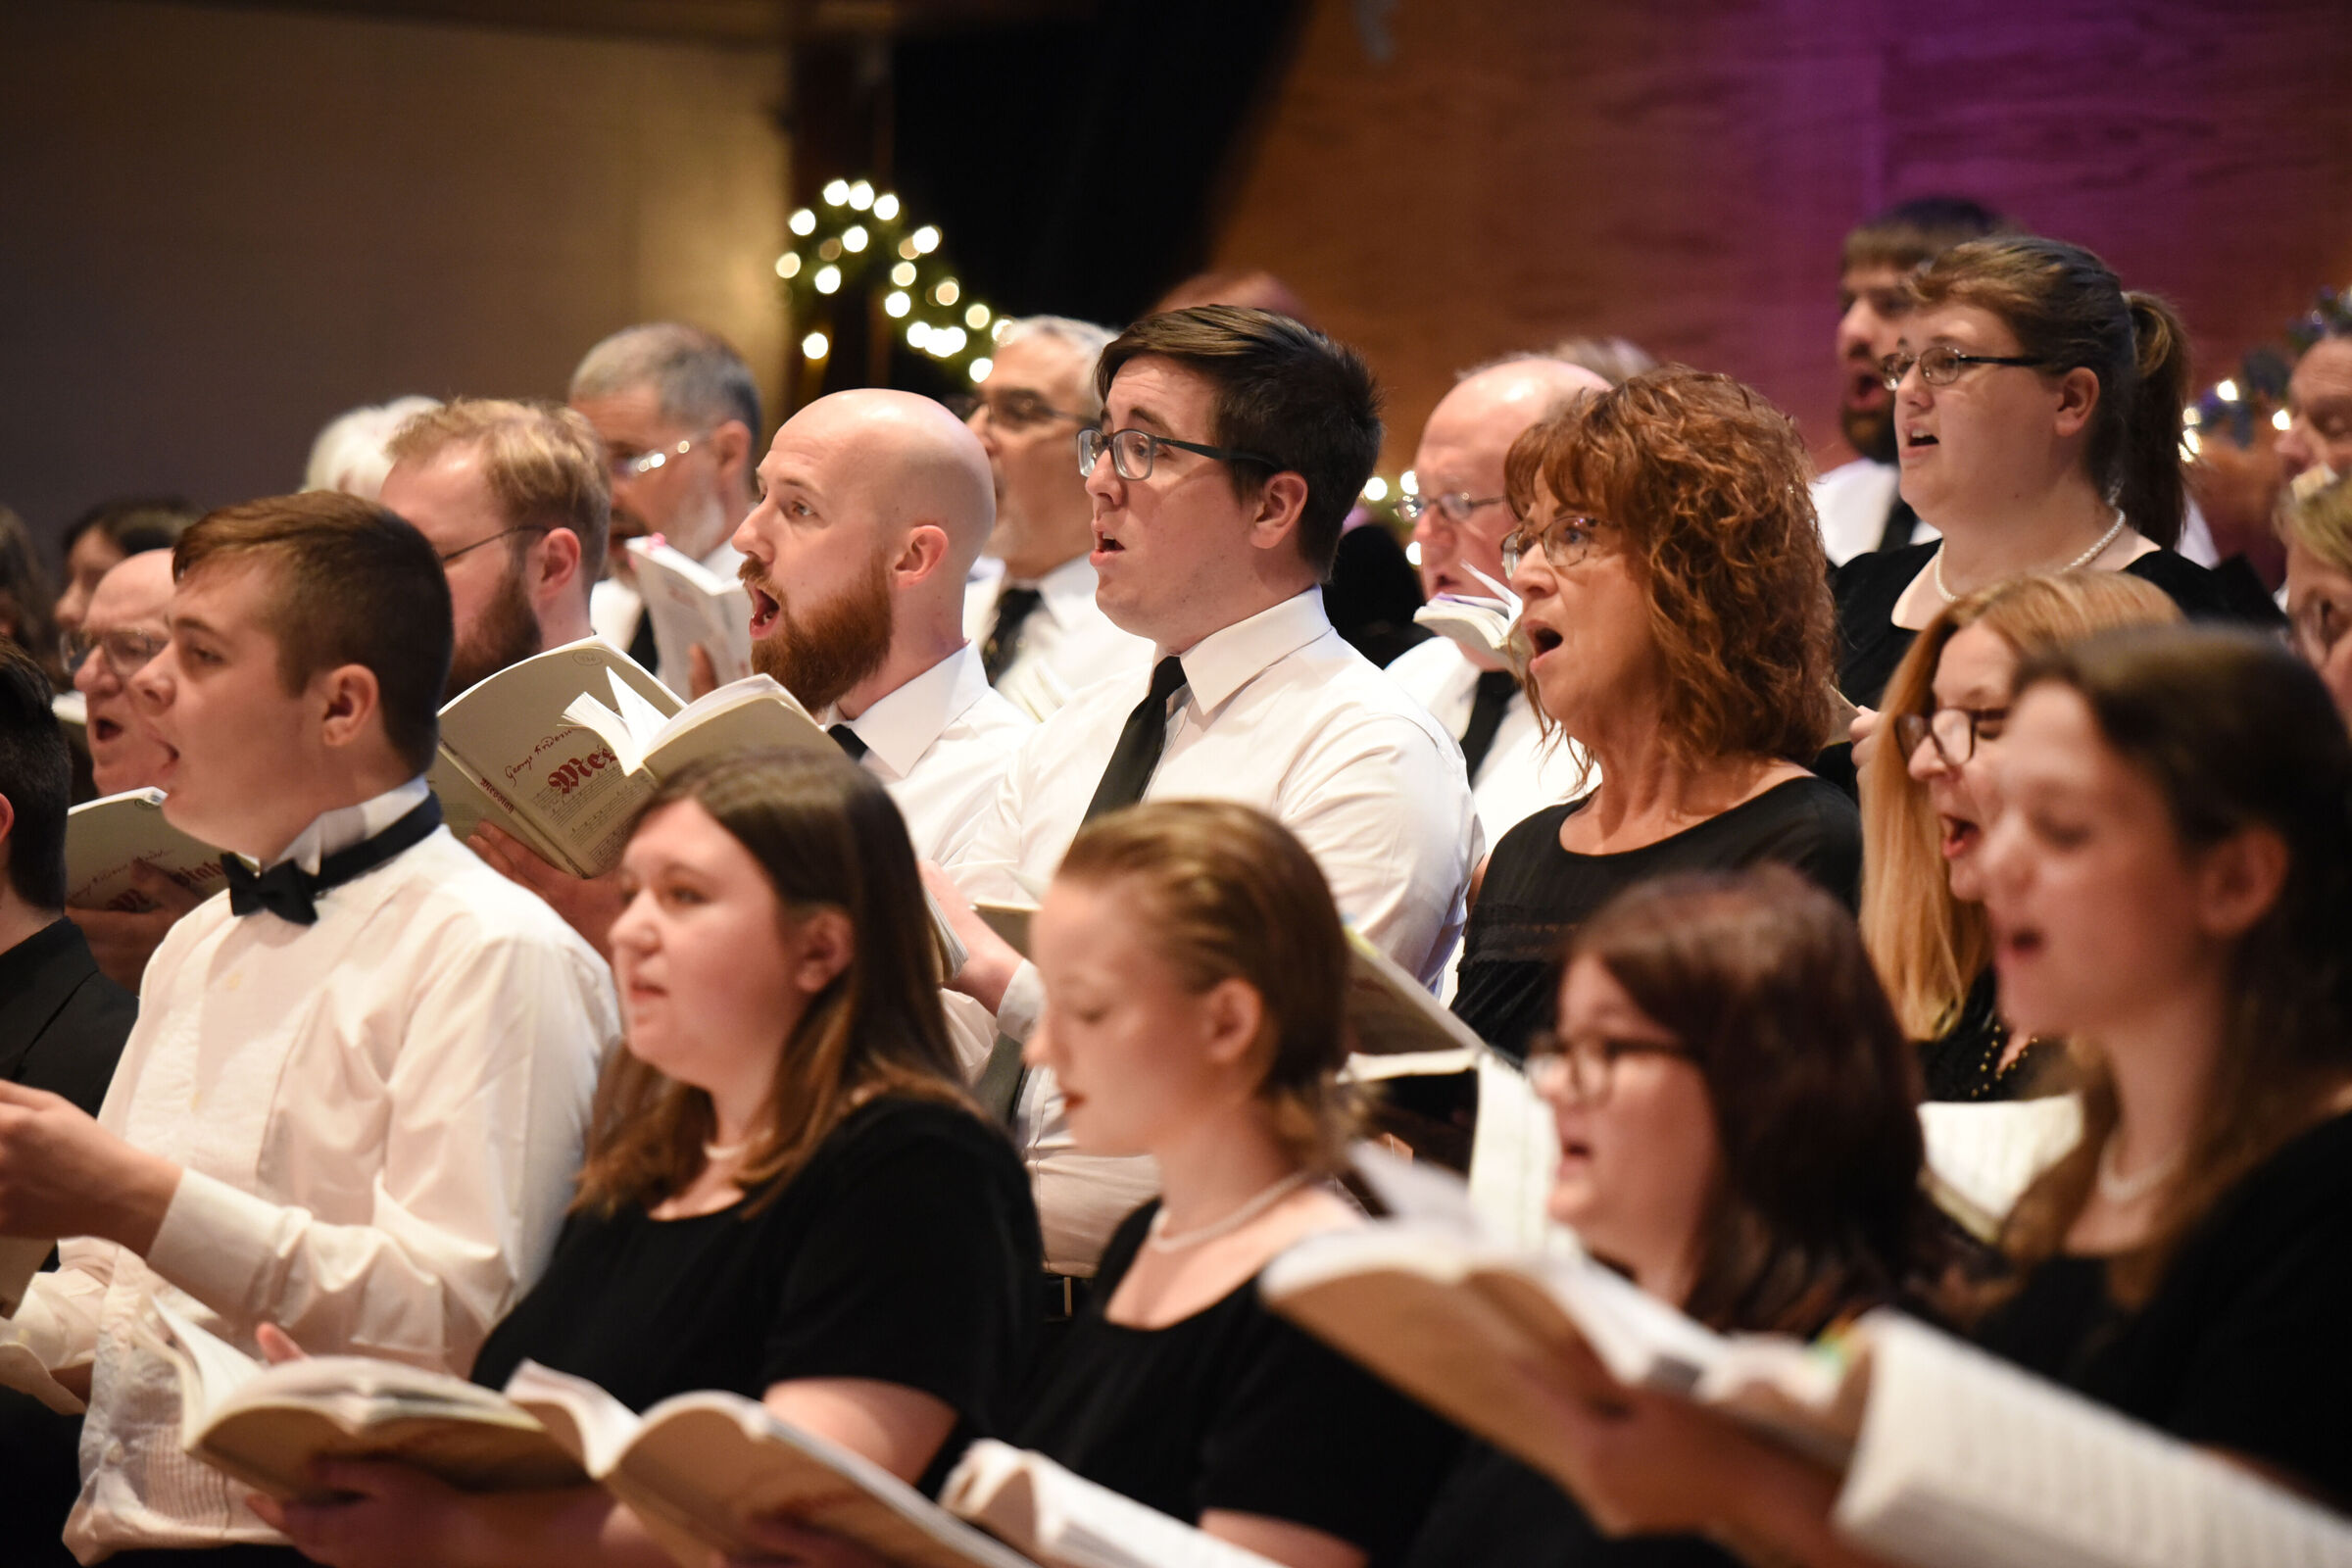 The 'Messiah' & 'Magnificat' presented by Greenville Choral Union and Orchestra